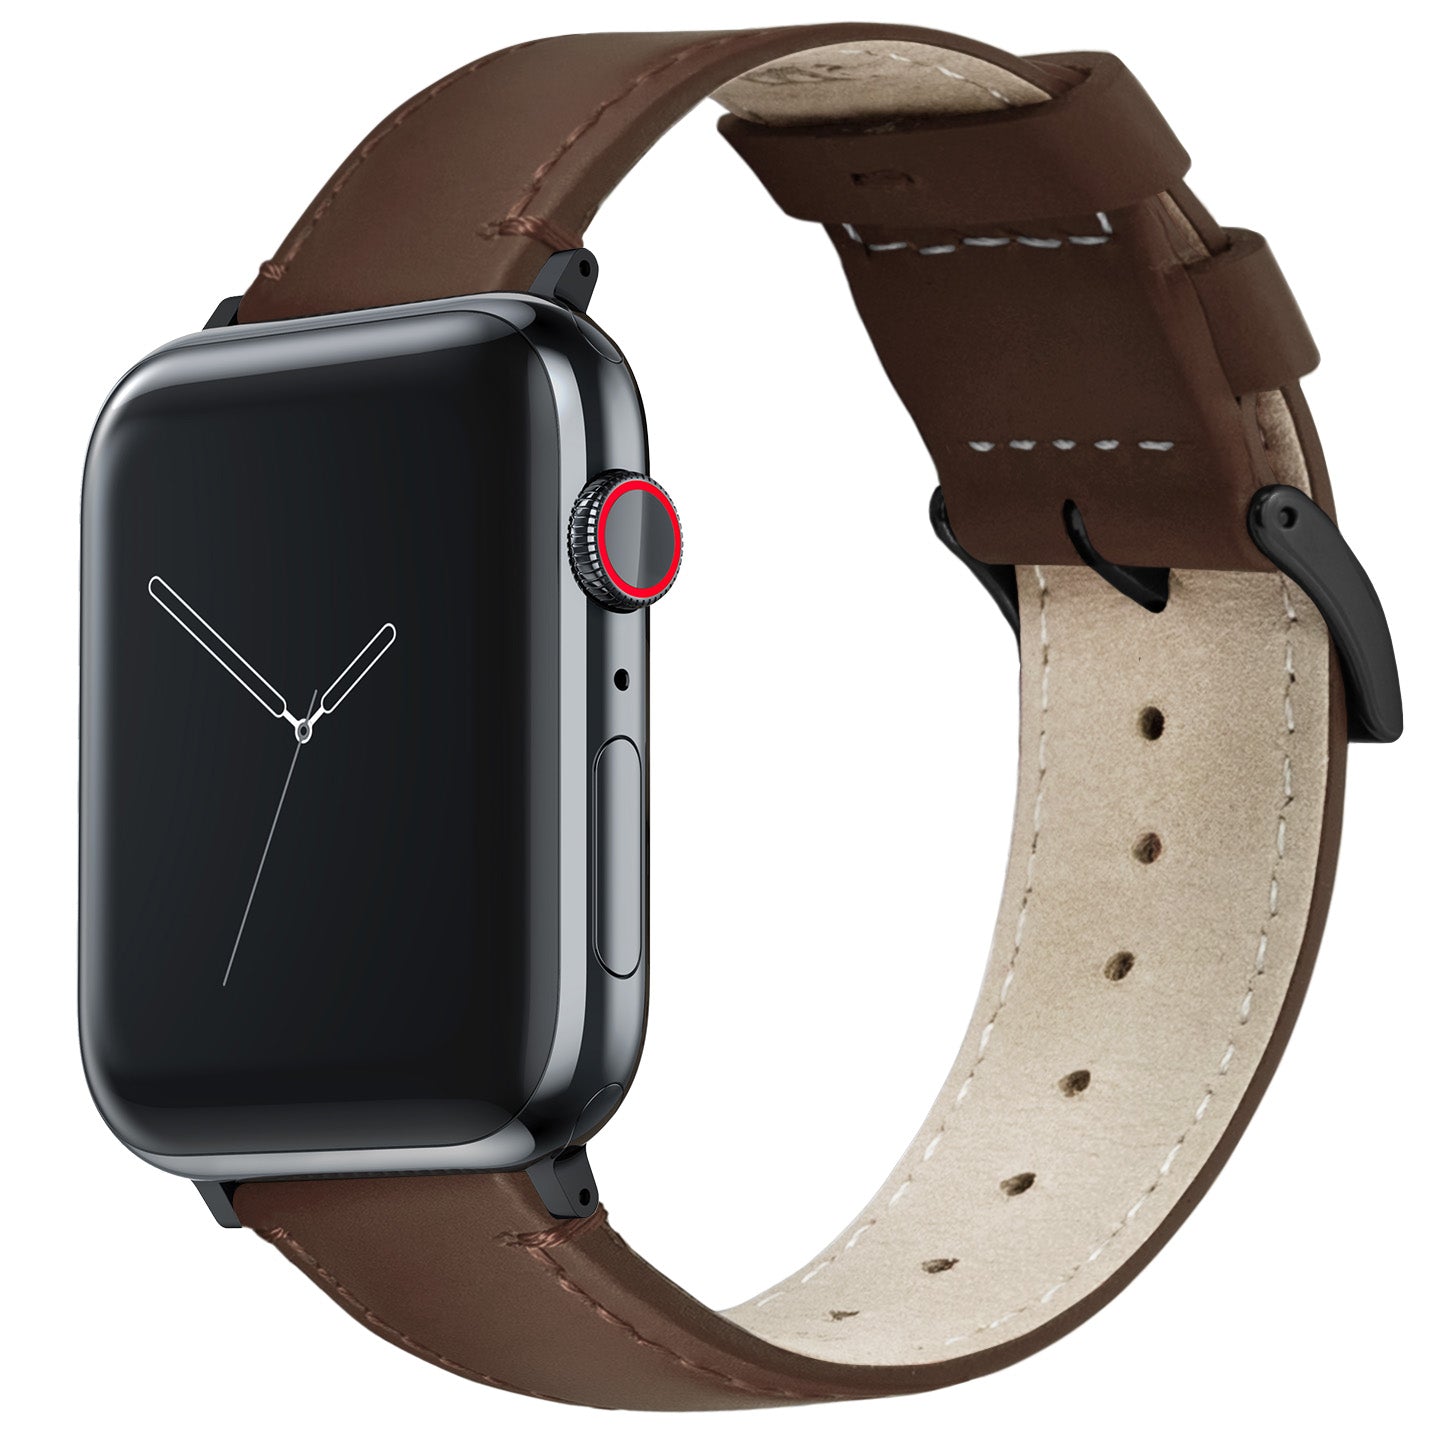 Leather Apple Watch bands